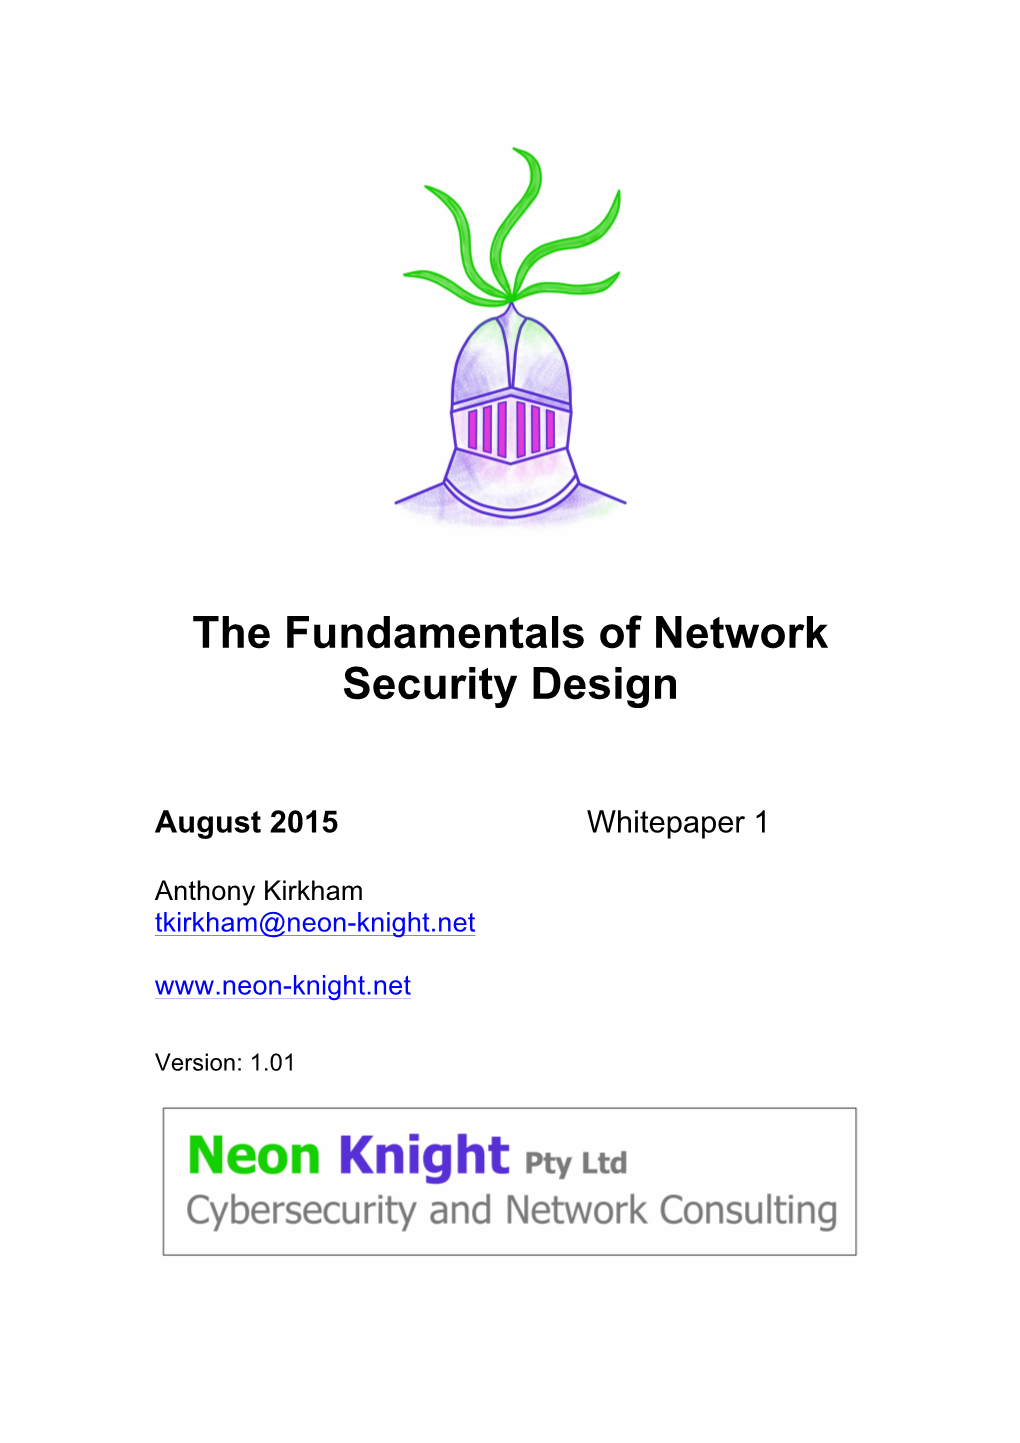 The Fundamentals of Network Security Design